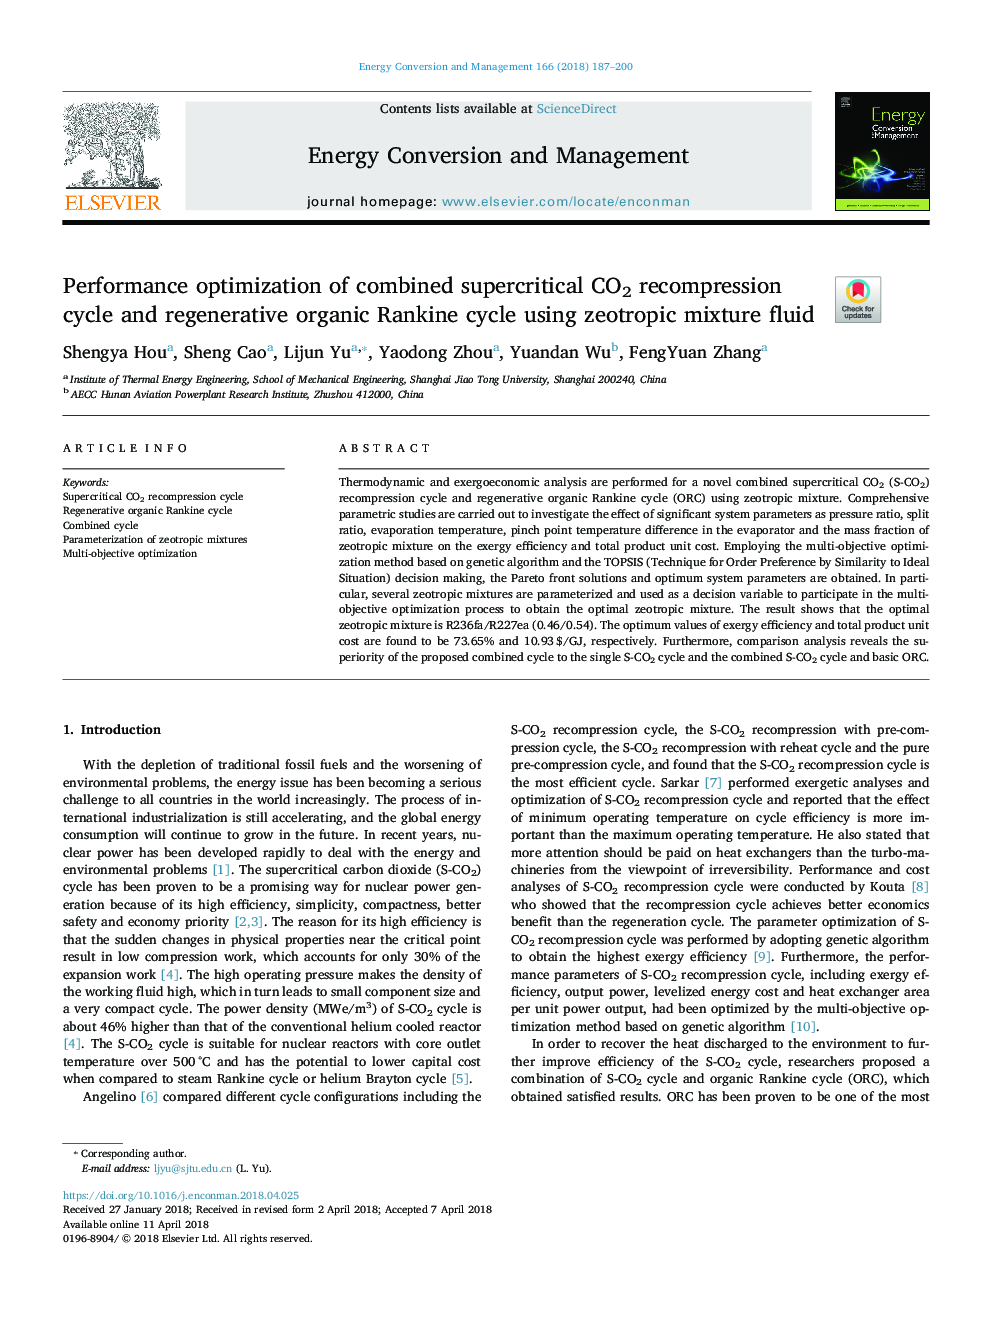 Performance optimization of combined supercritical CO2 recompression cycle and regenerative organic Rankine cycle using zeotropic mixture fluid